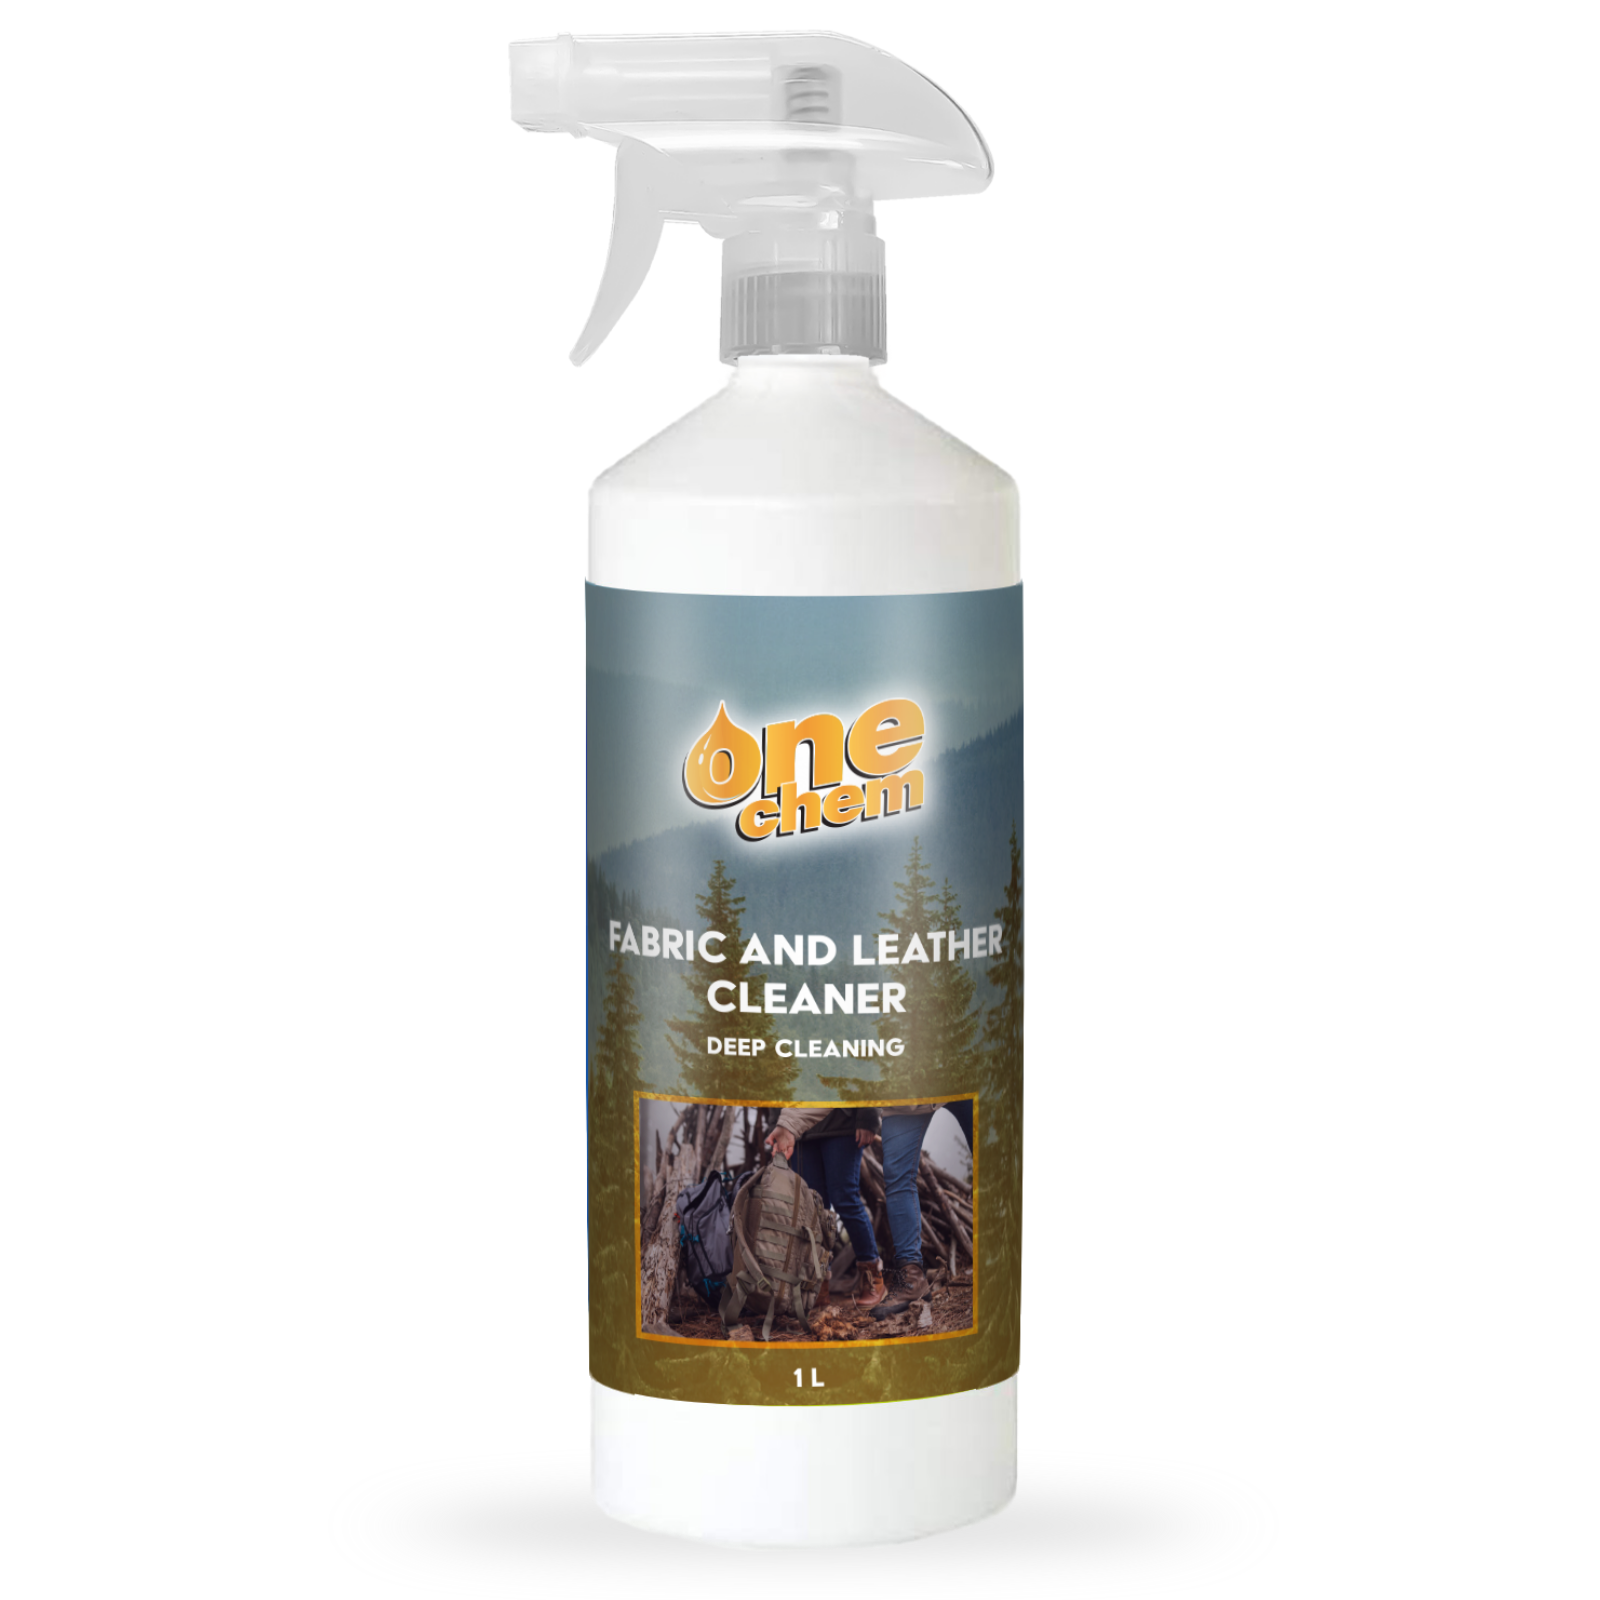 One Chem - Fabric & Leather Cleaner - 1L